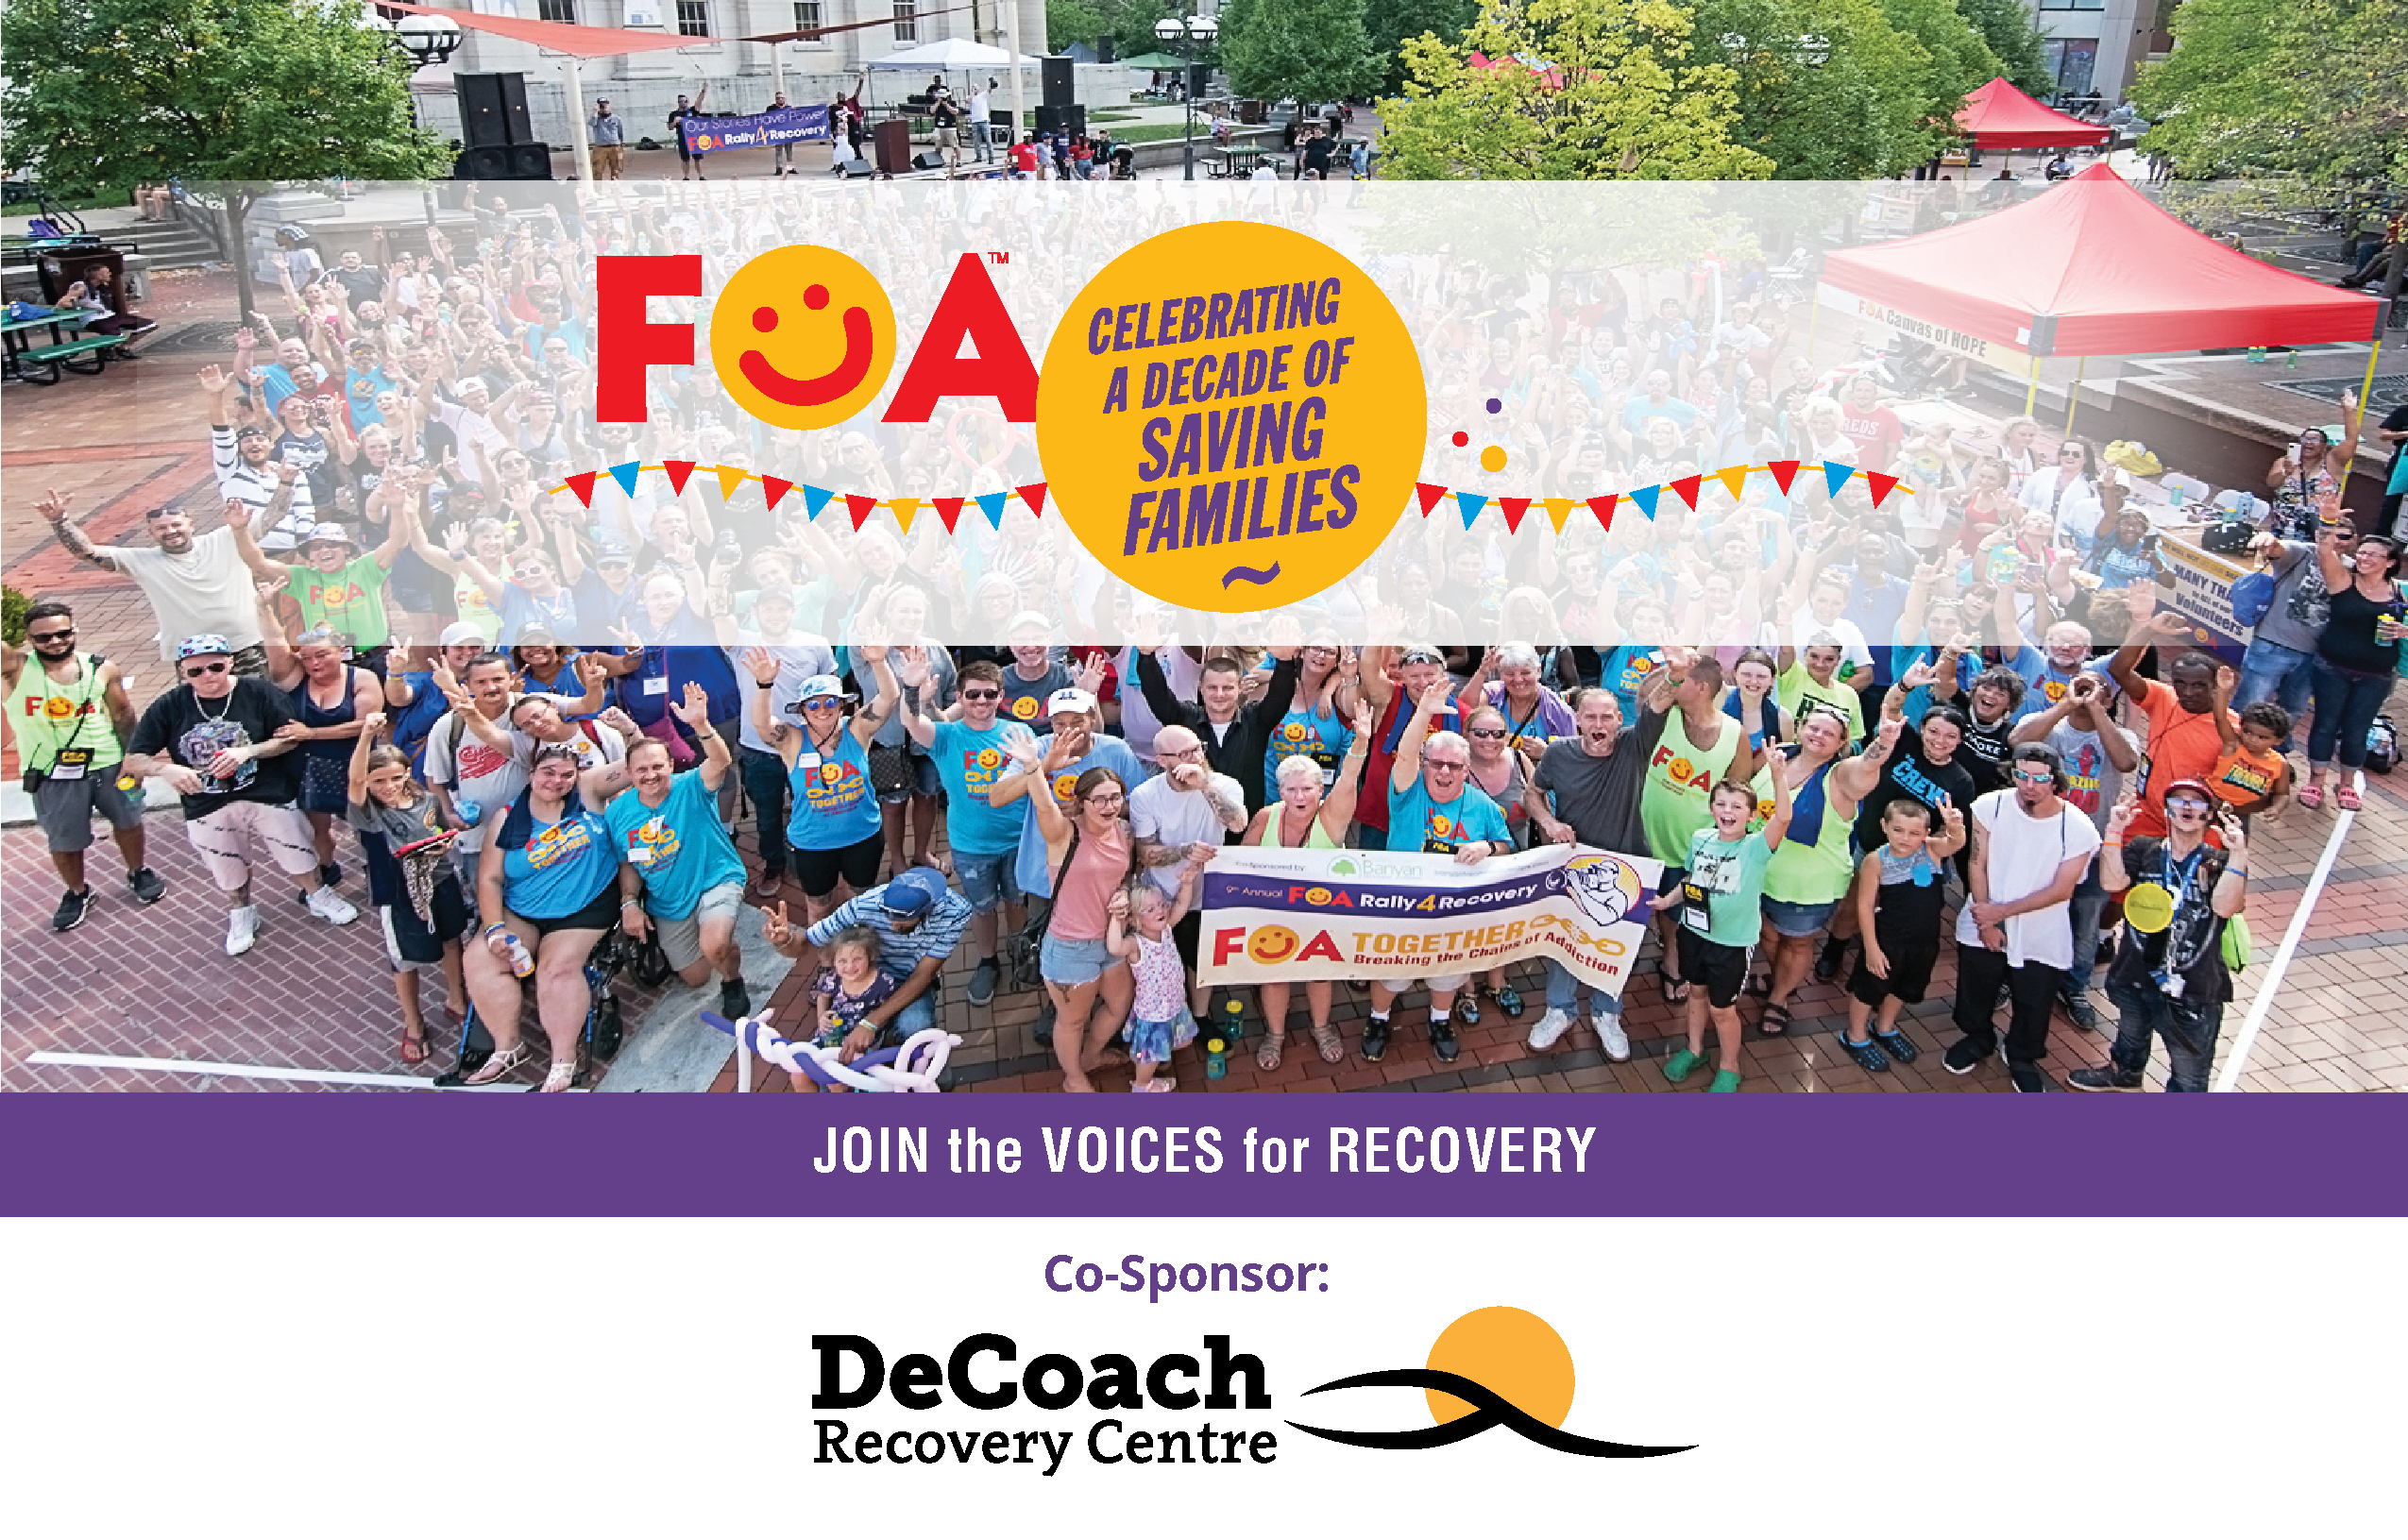 Celebrating a decade of families for recovery